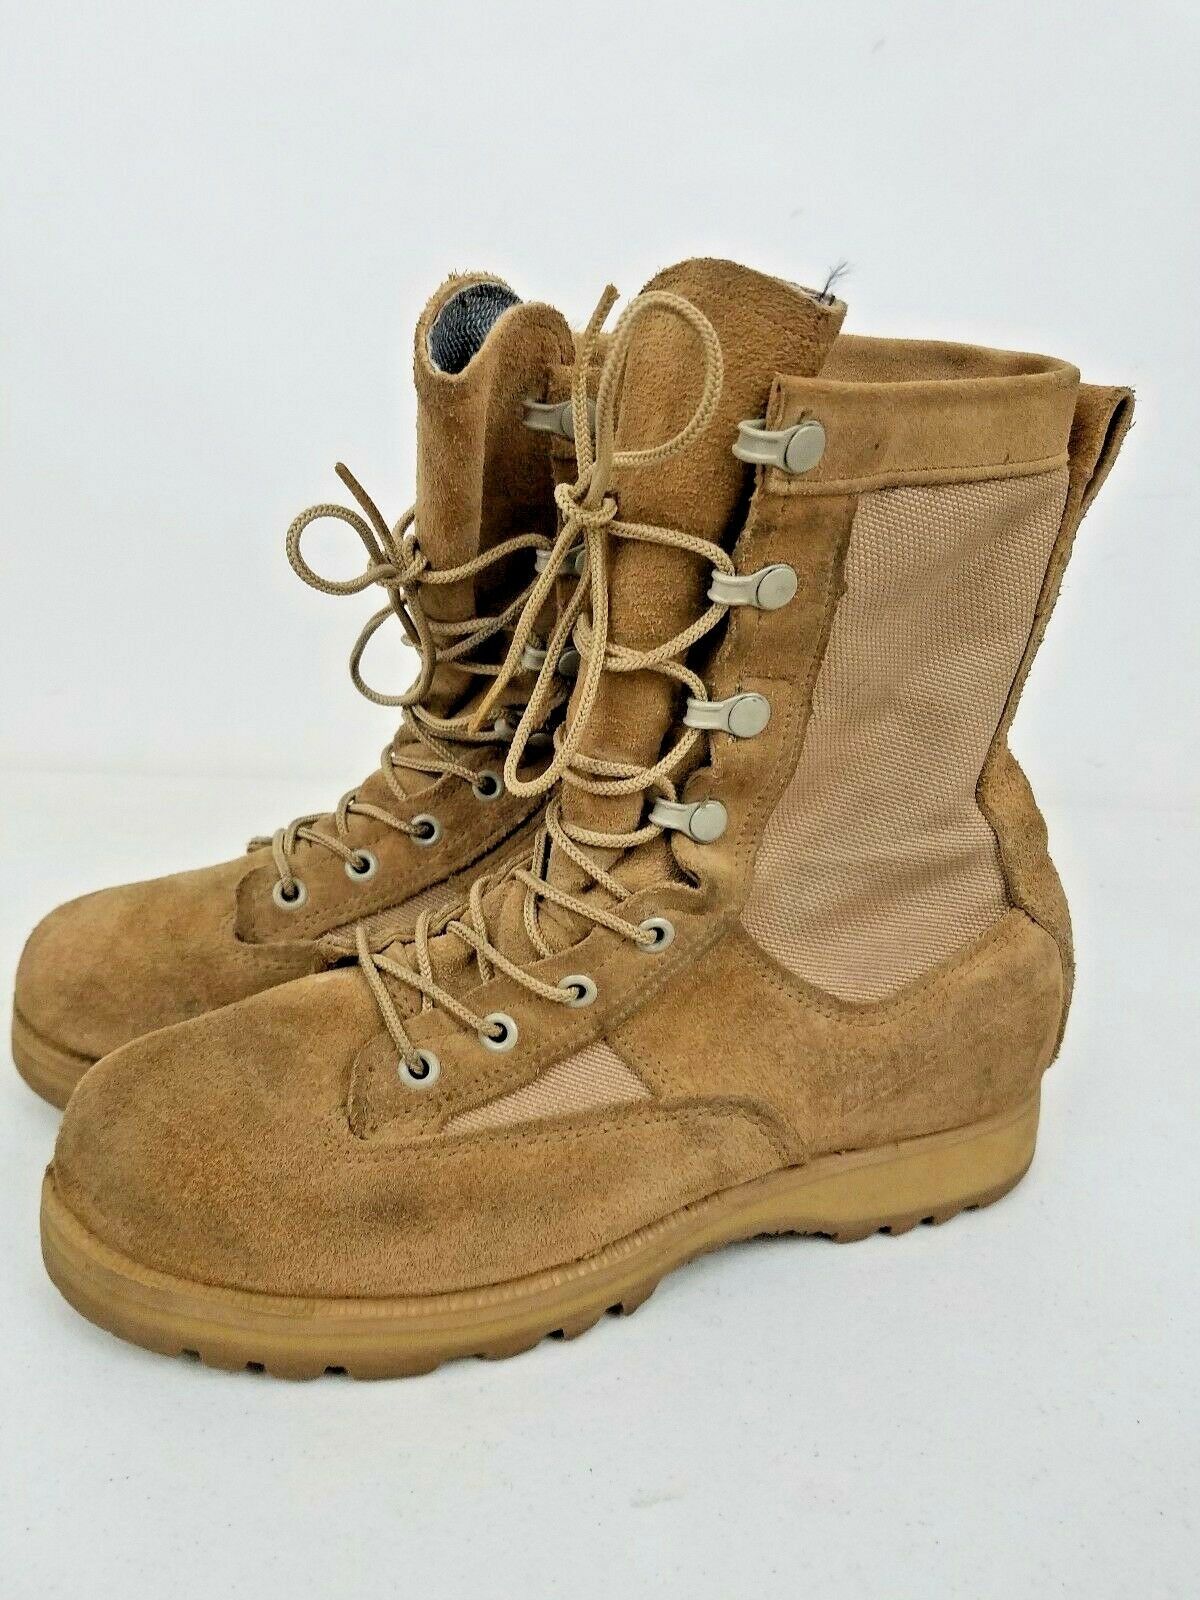 belleville gore tex military boots